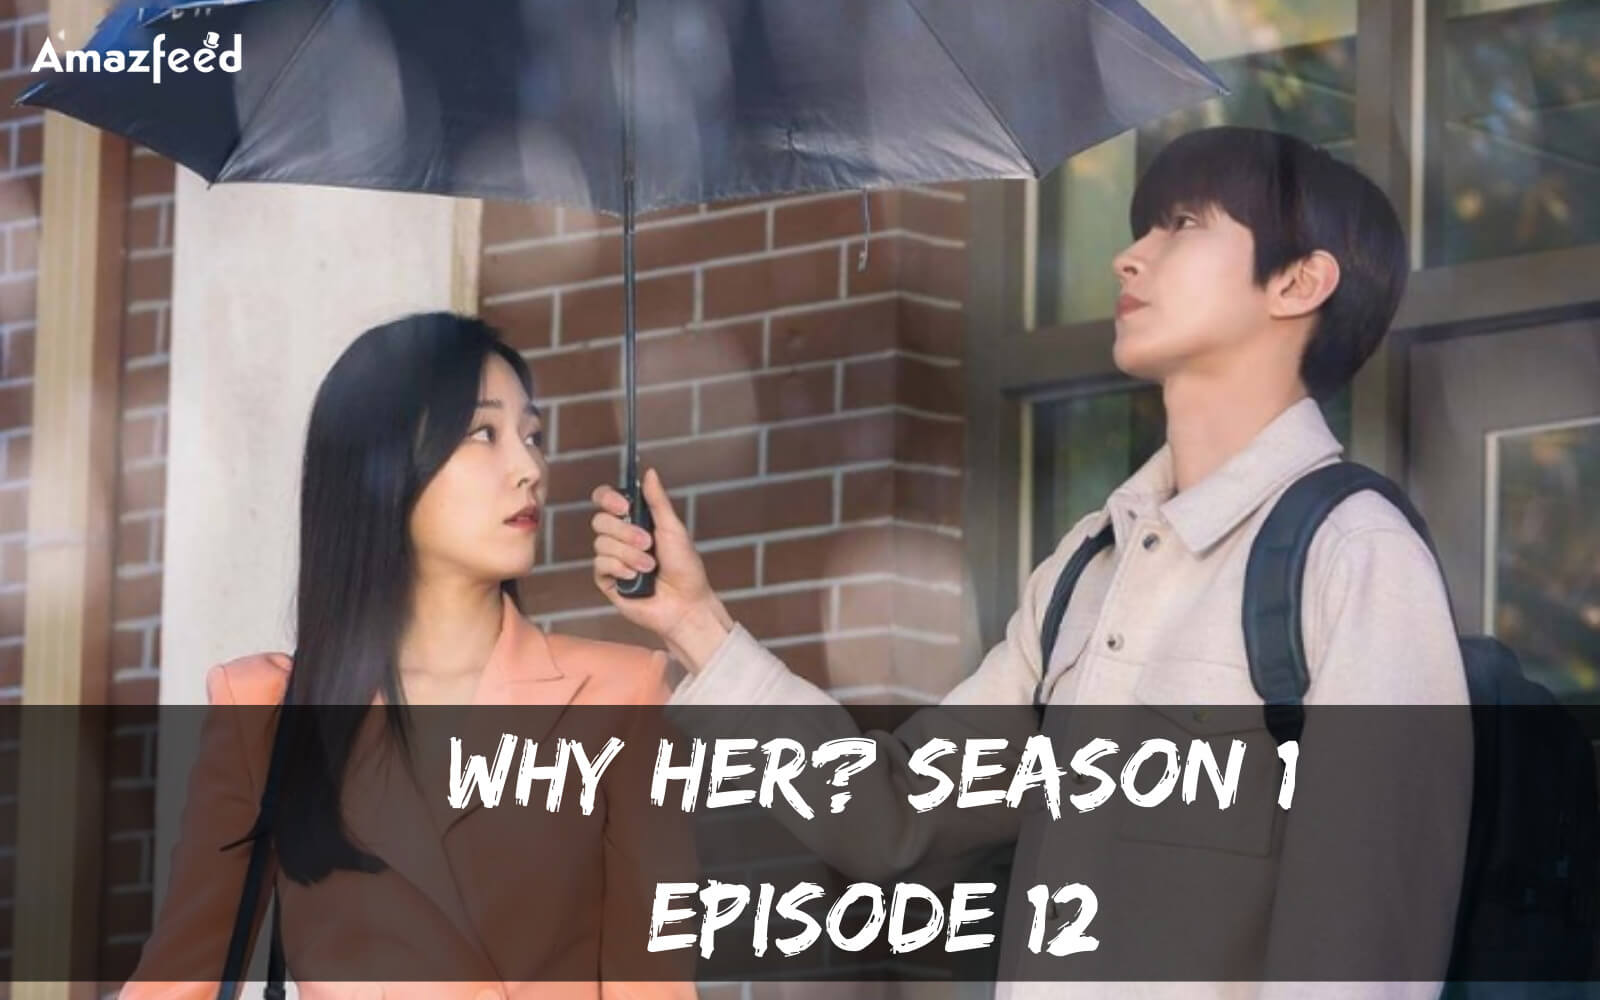 Why Her Season 1 Episode 12 release date